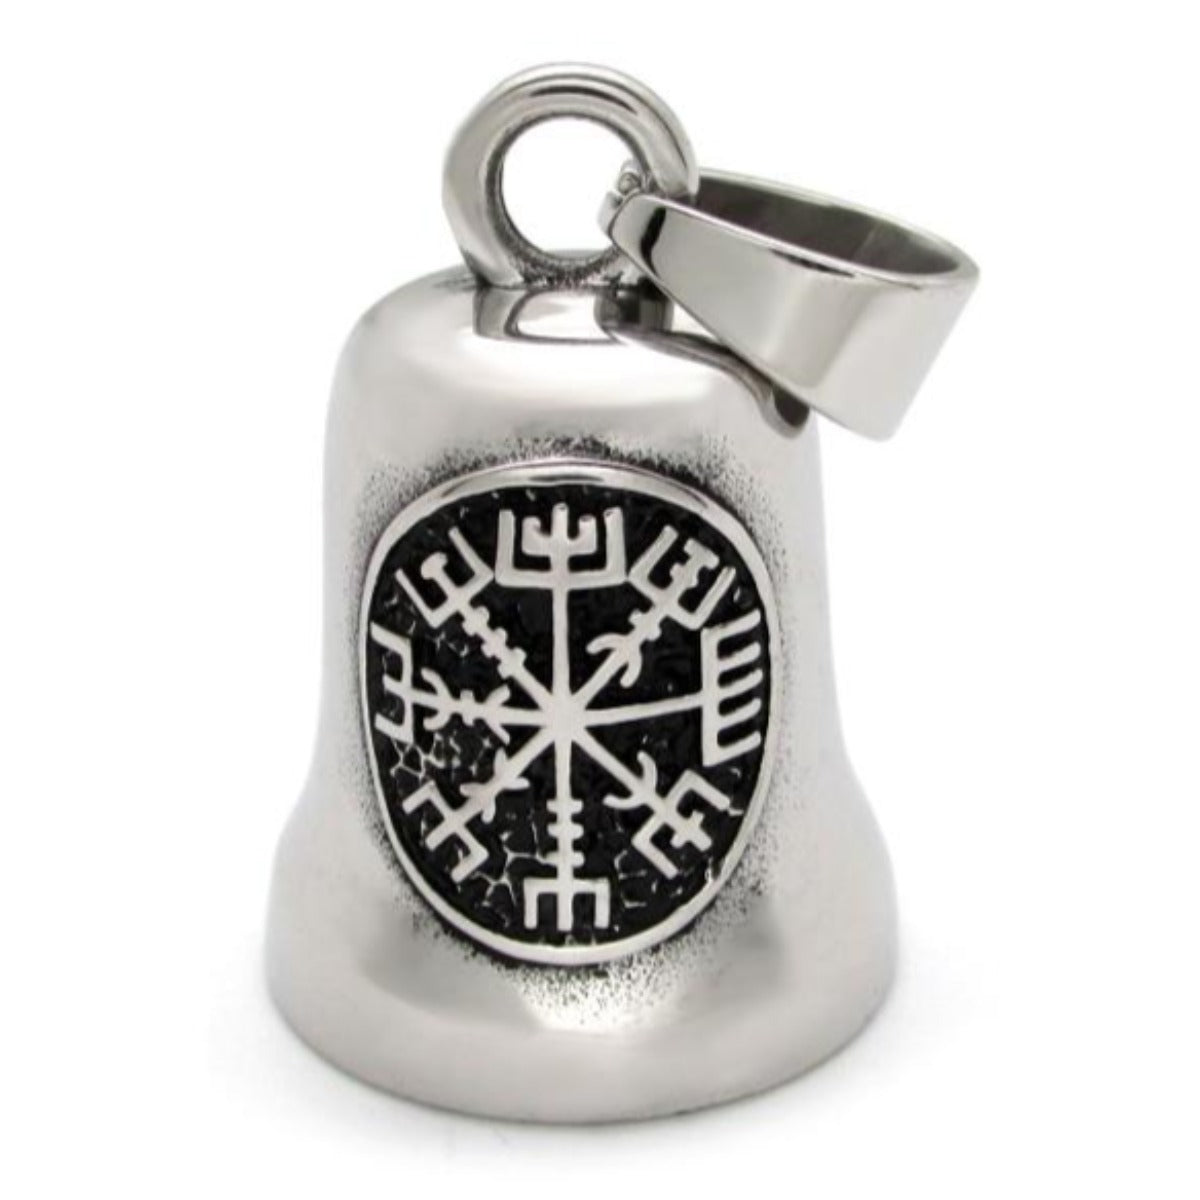 A Stainless Steel Viking Compass Gremlin Bell with a black emblem design on the front.